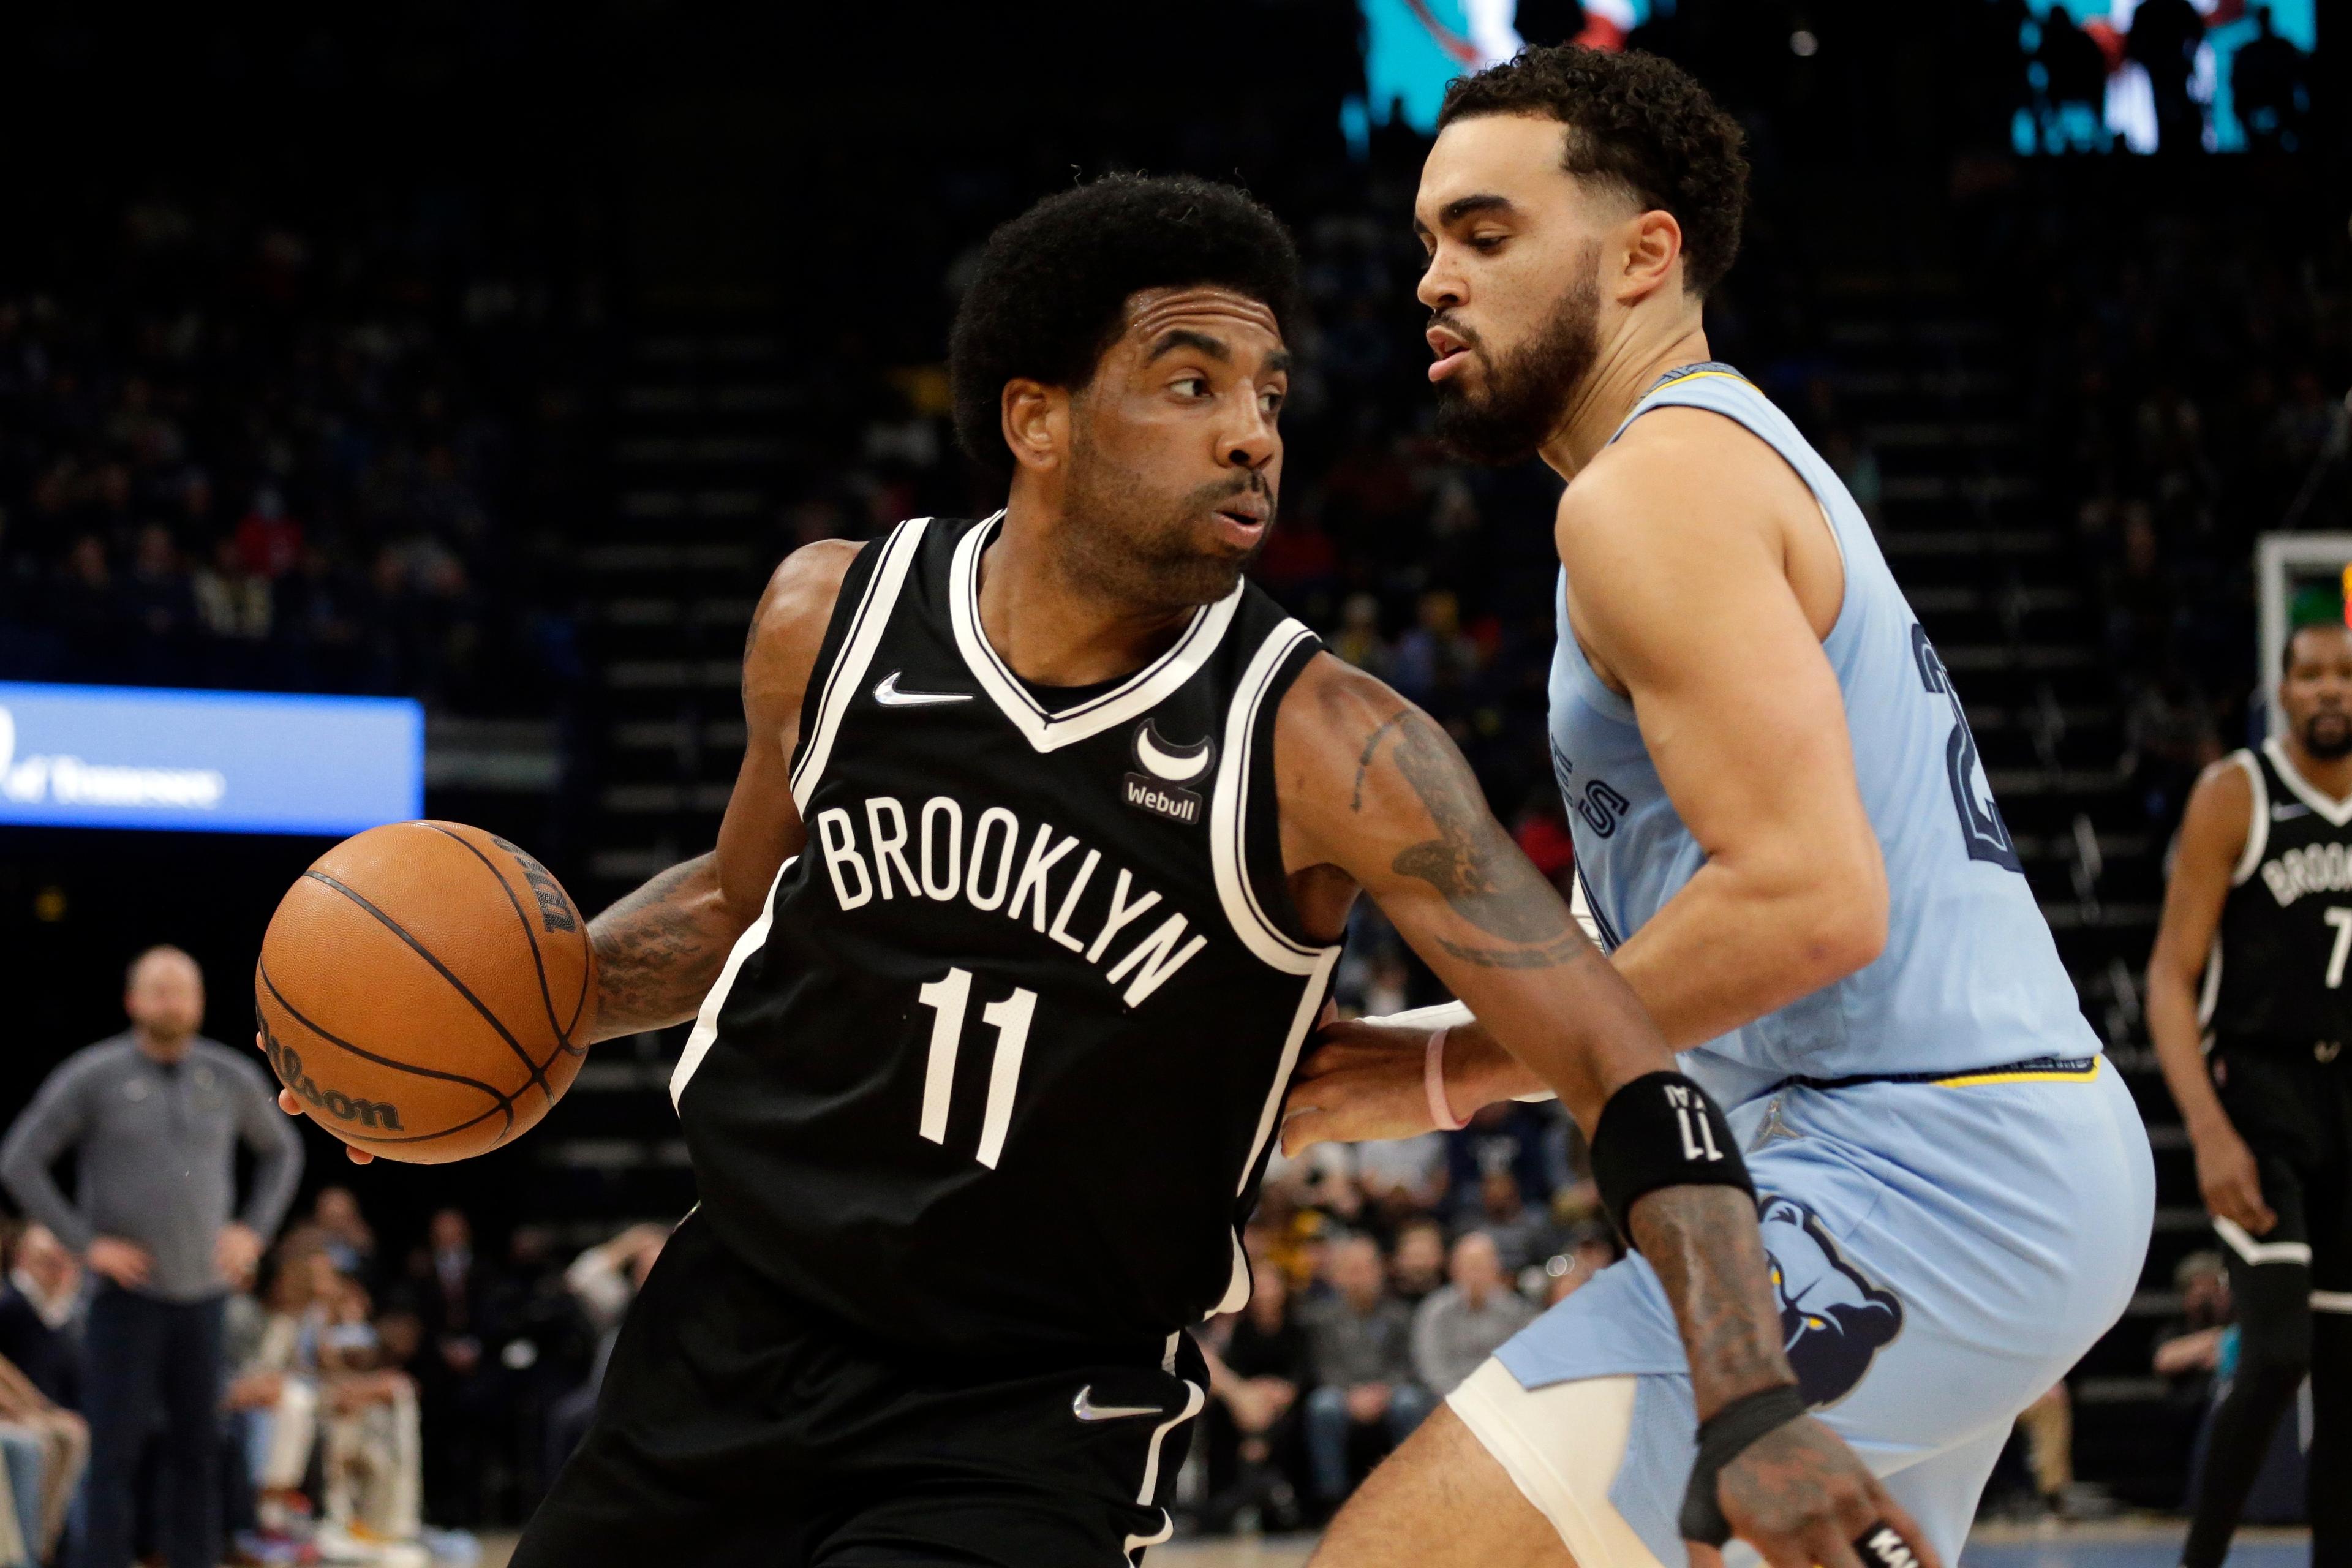 Brooklyn Nets guard Kyrie Irving (11) drives to the basket as Memphis Grizzlies guard Tyus Jones (21) defends during the first half at FedExForum. / Petre Thomas-USA TODAY Sports